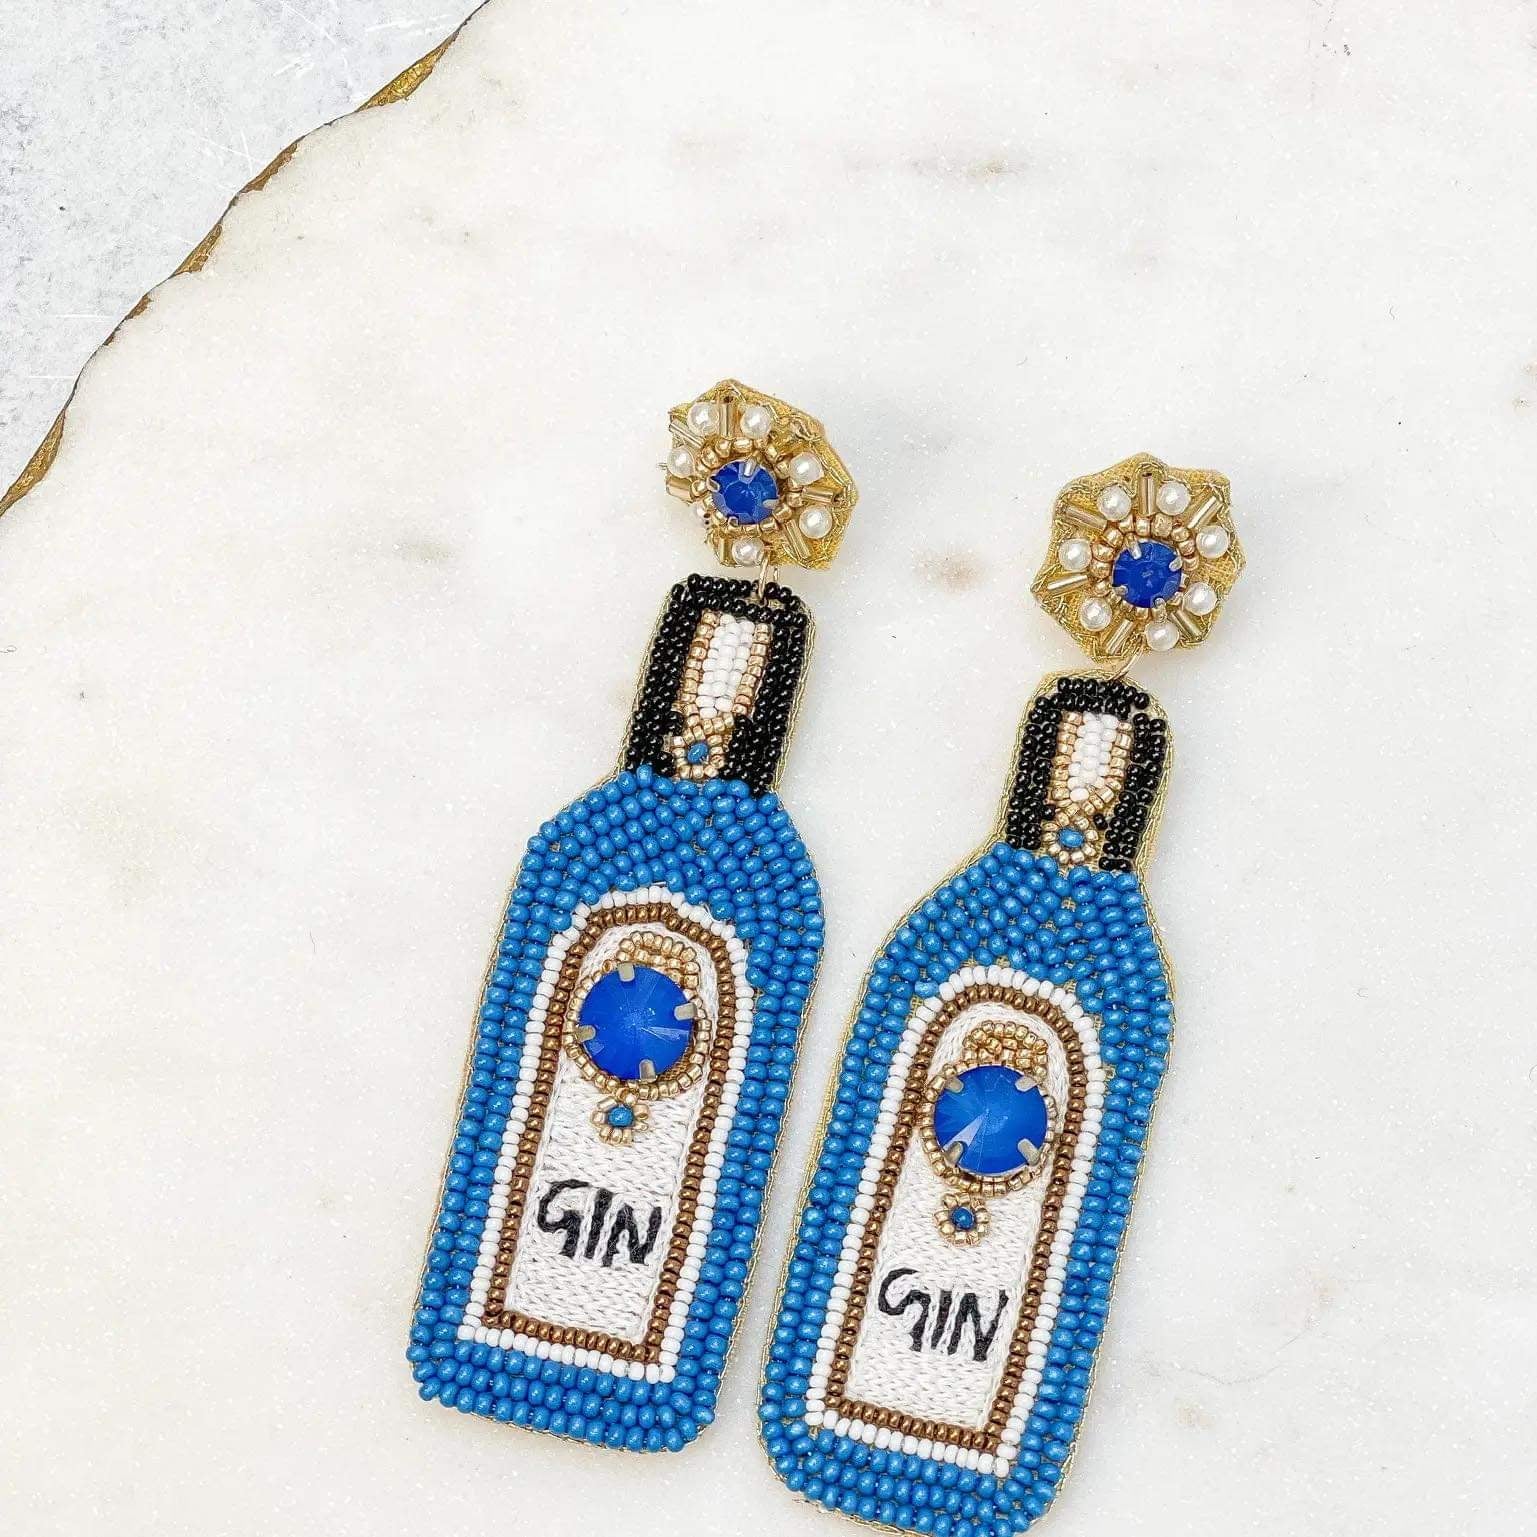 BLUE GIN EARRINGS - Baby Bums Clothing 